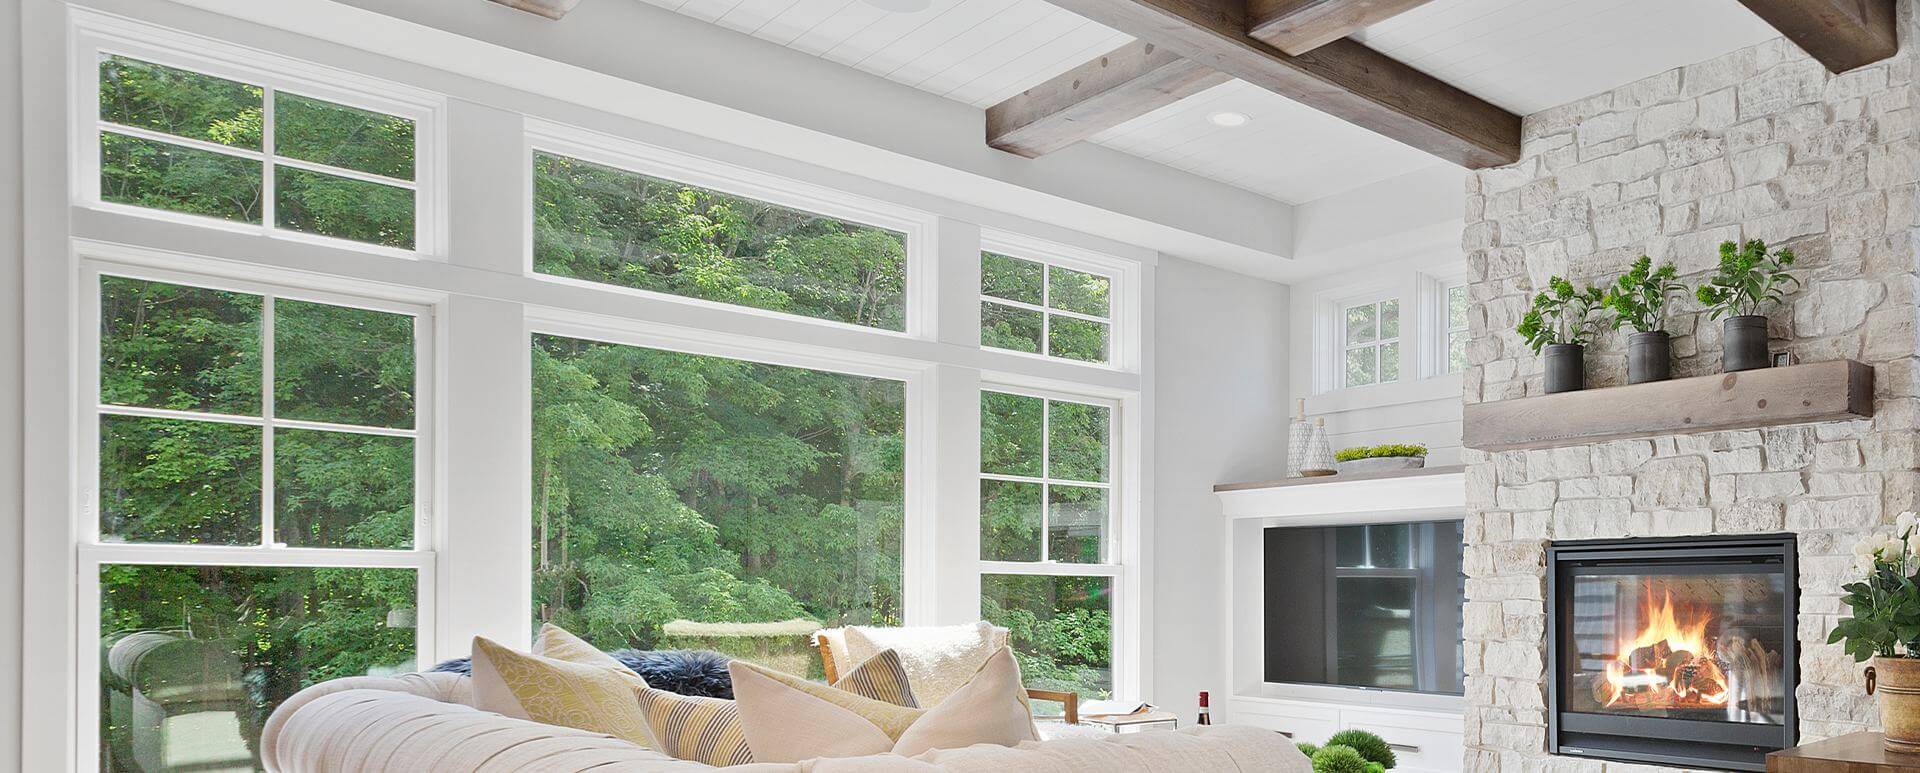 Transom windows above large windows in a large living area with stone fireplace and a clear view of the outside, with trees beyond.